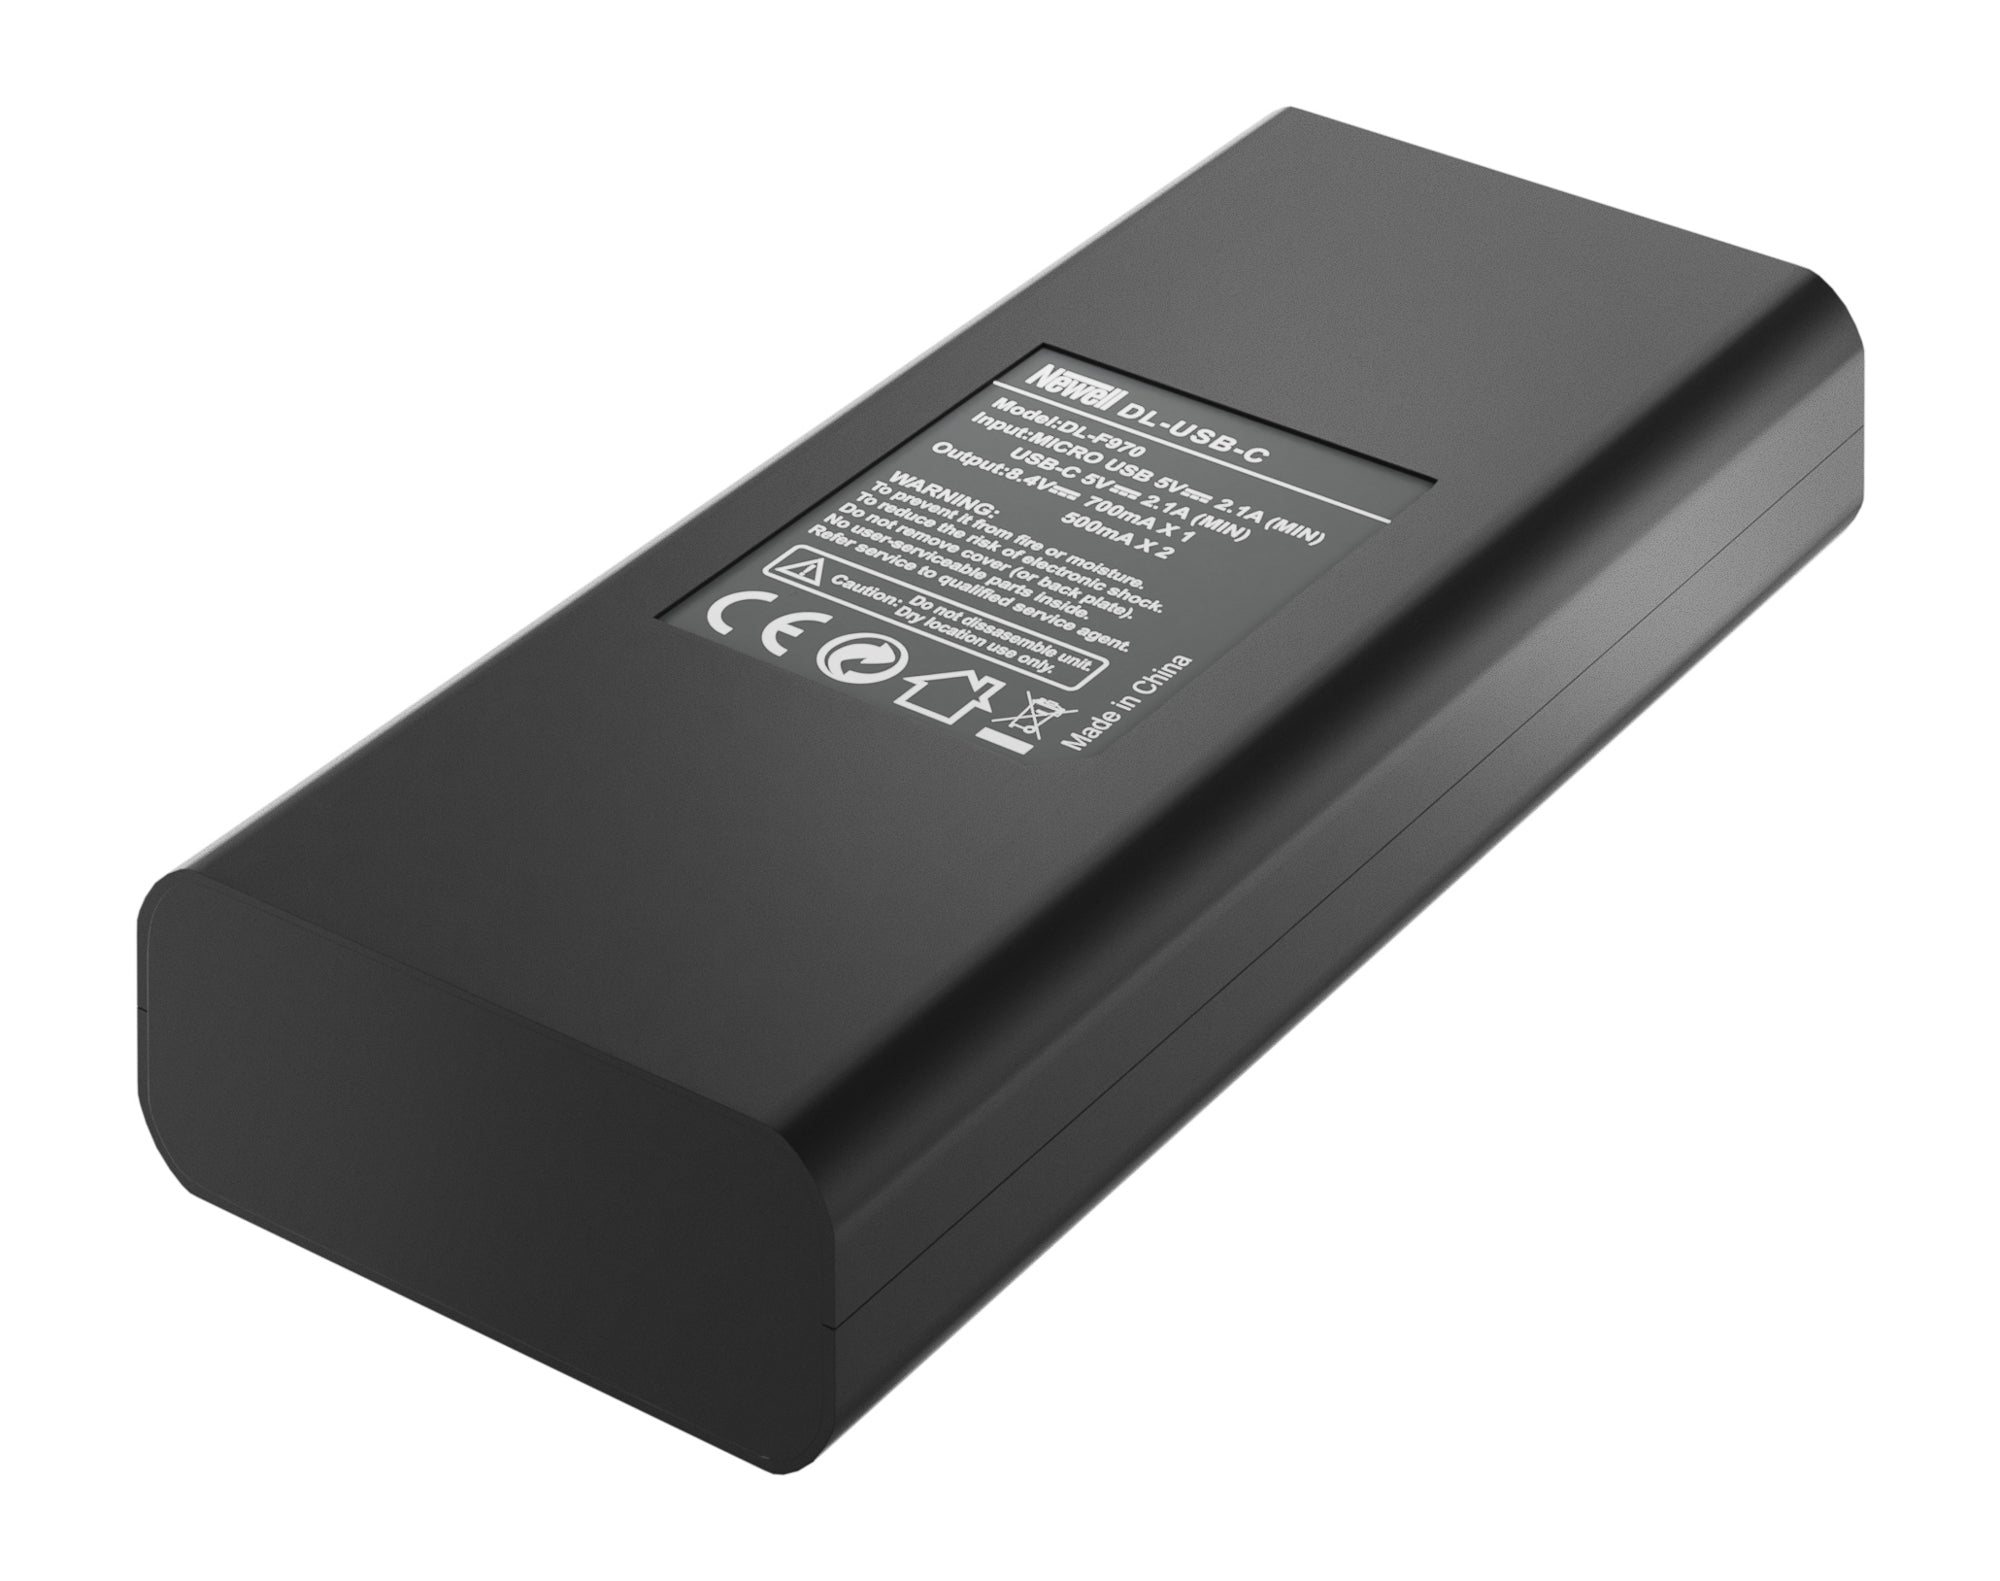 Newell DL-USB-C charger and 1x NP-F570 battery for Sony 2600mAh / 19.24Wh